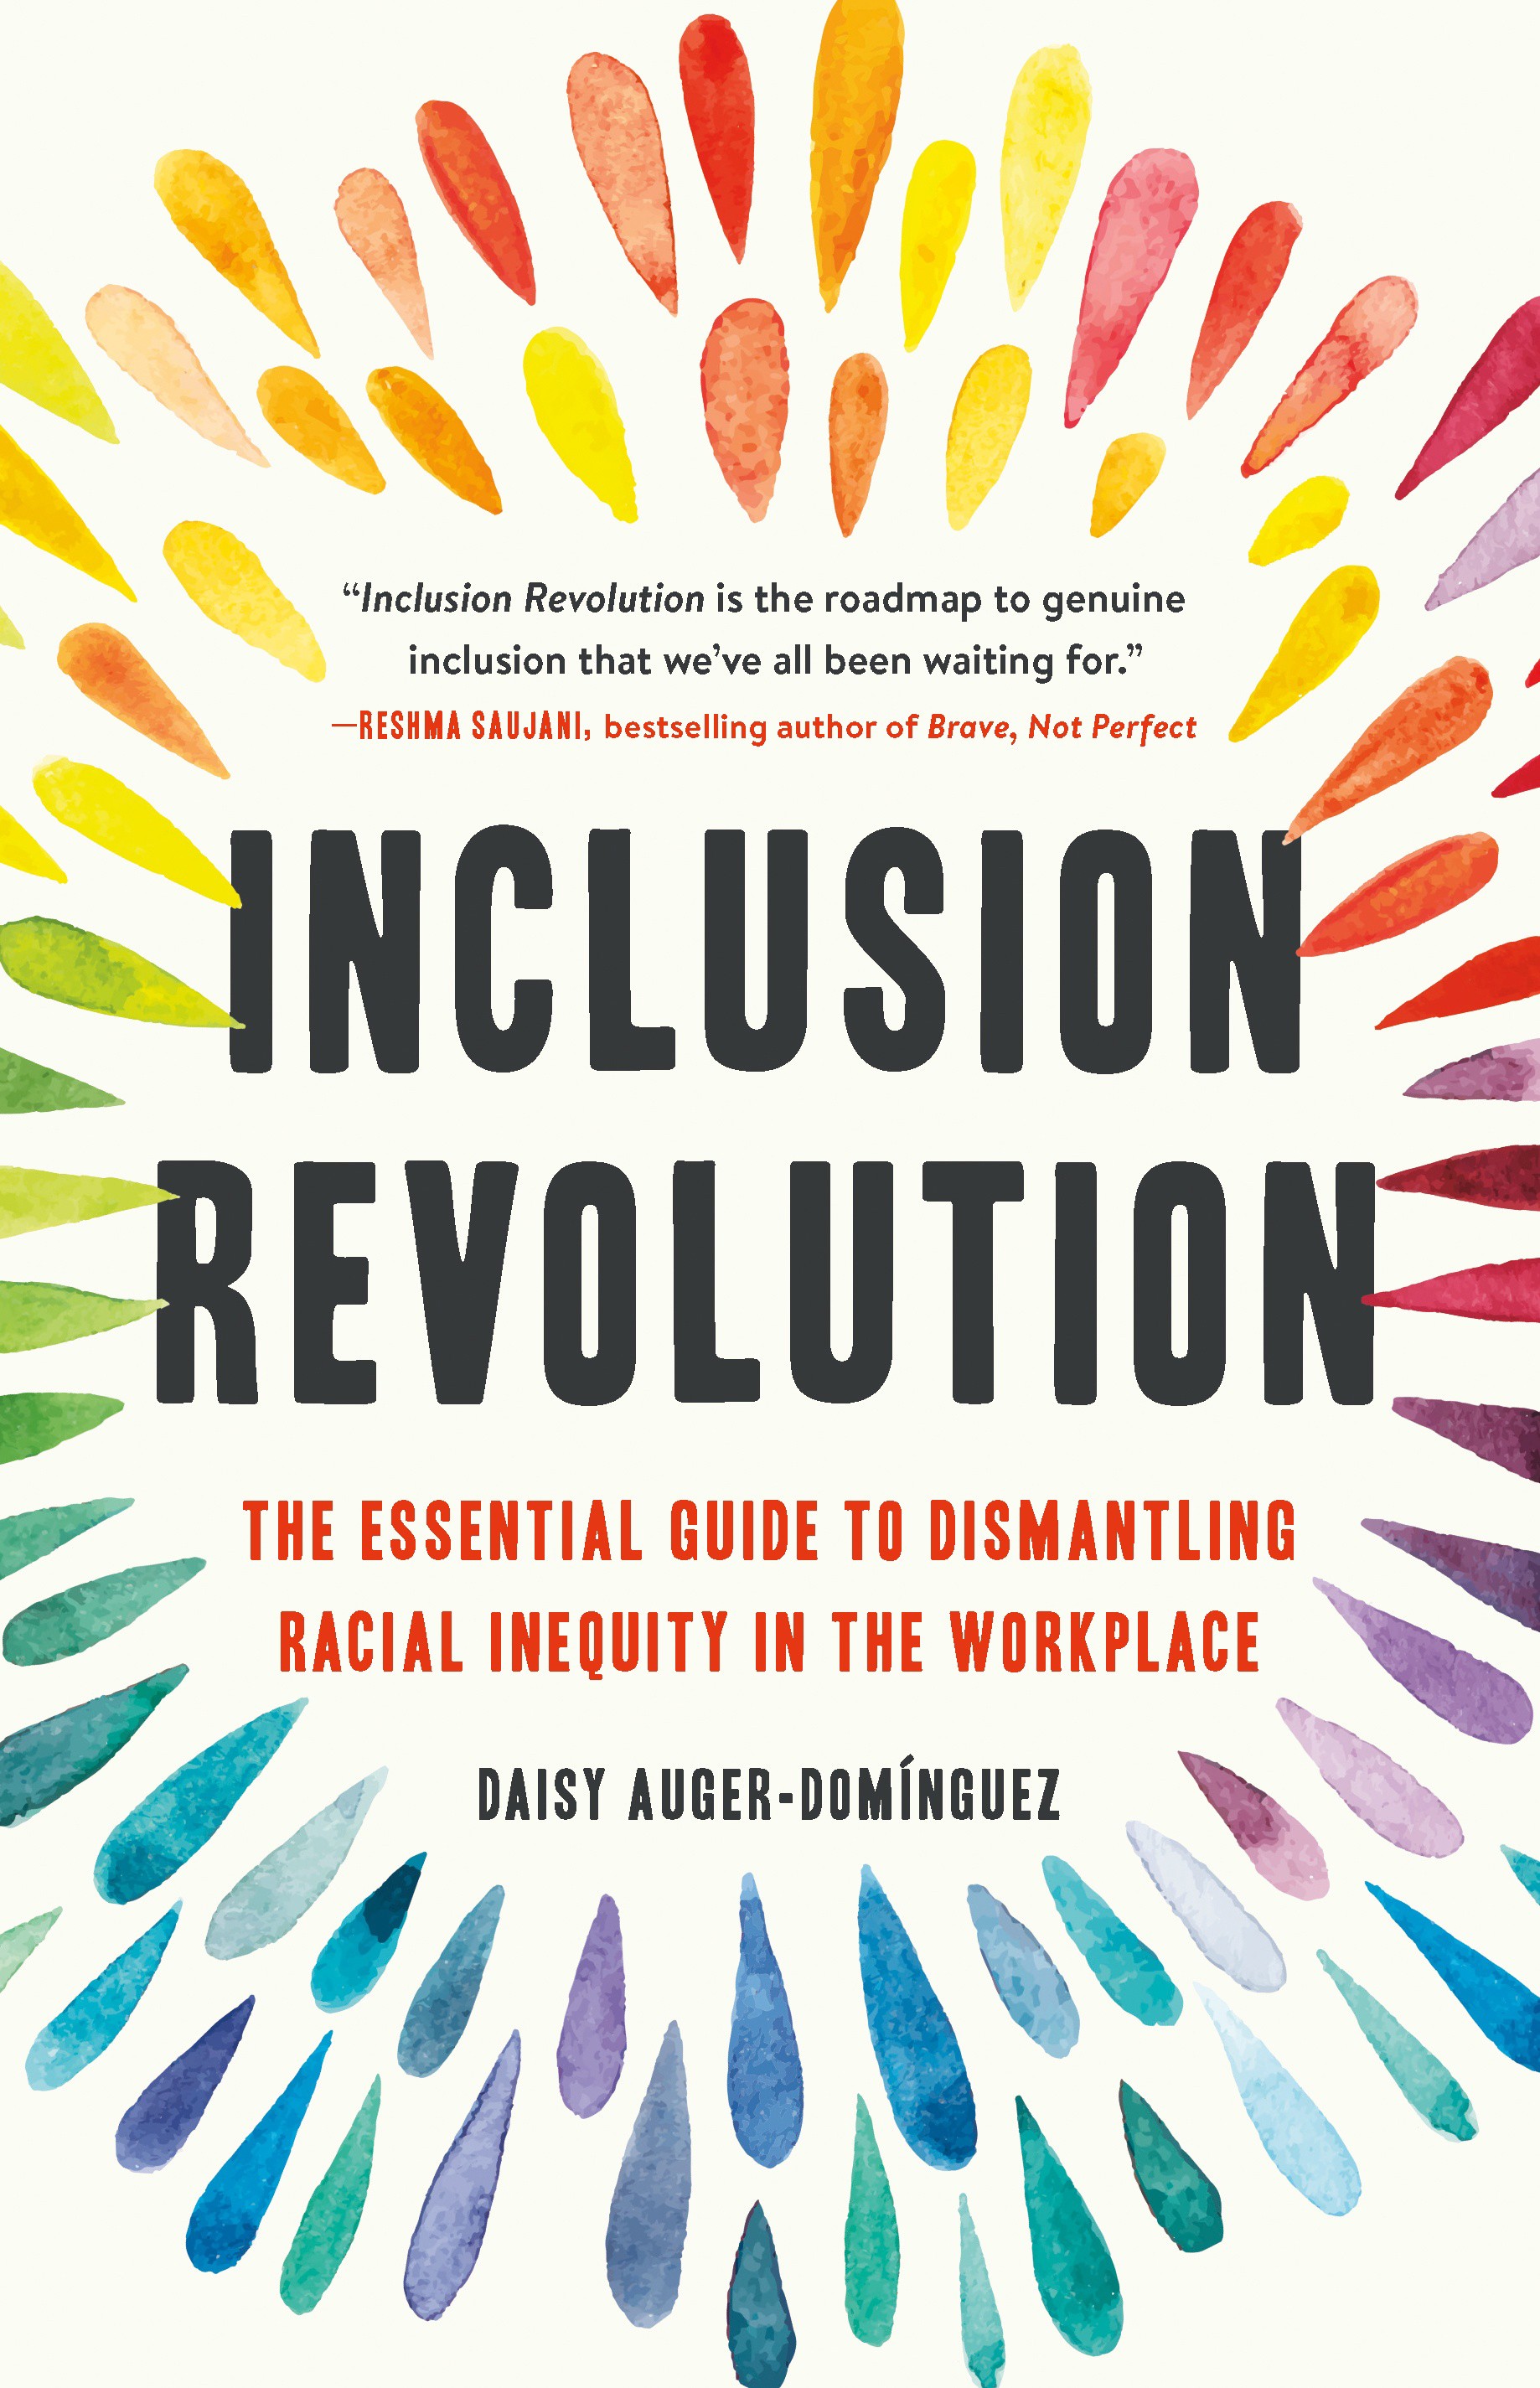 NDG Book Review: ‘Inclusion Revolution’ is an advice-packed guide